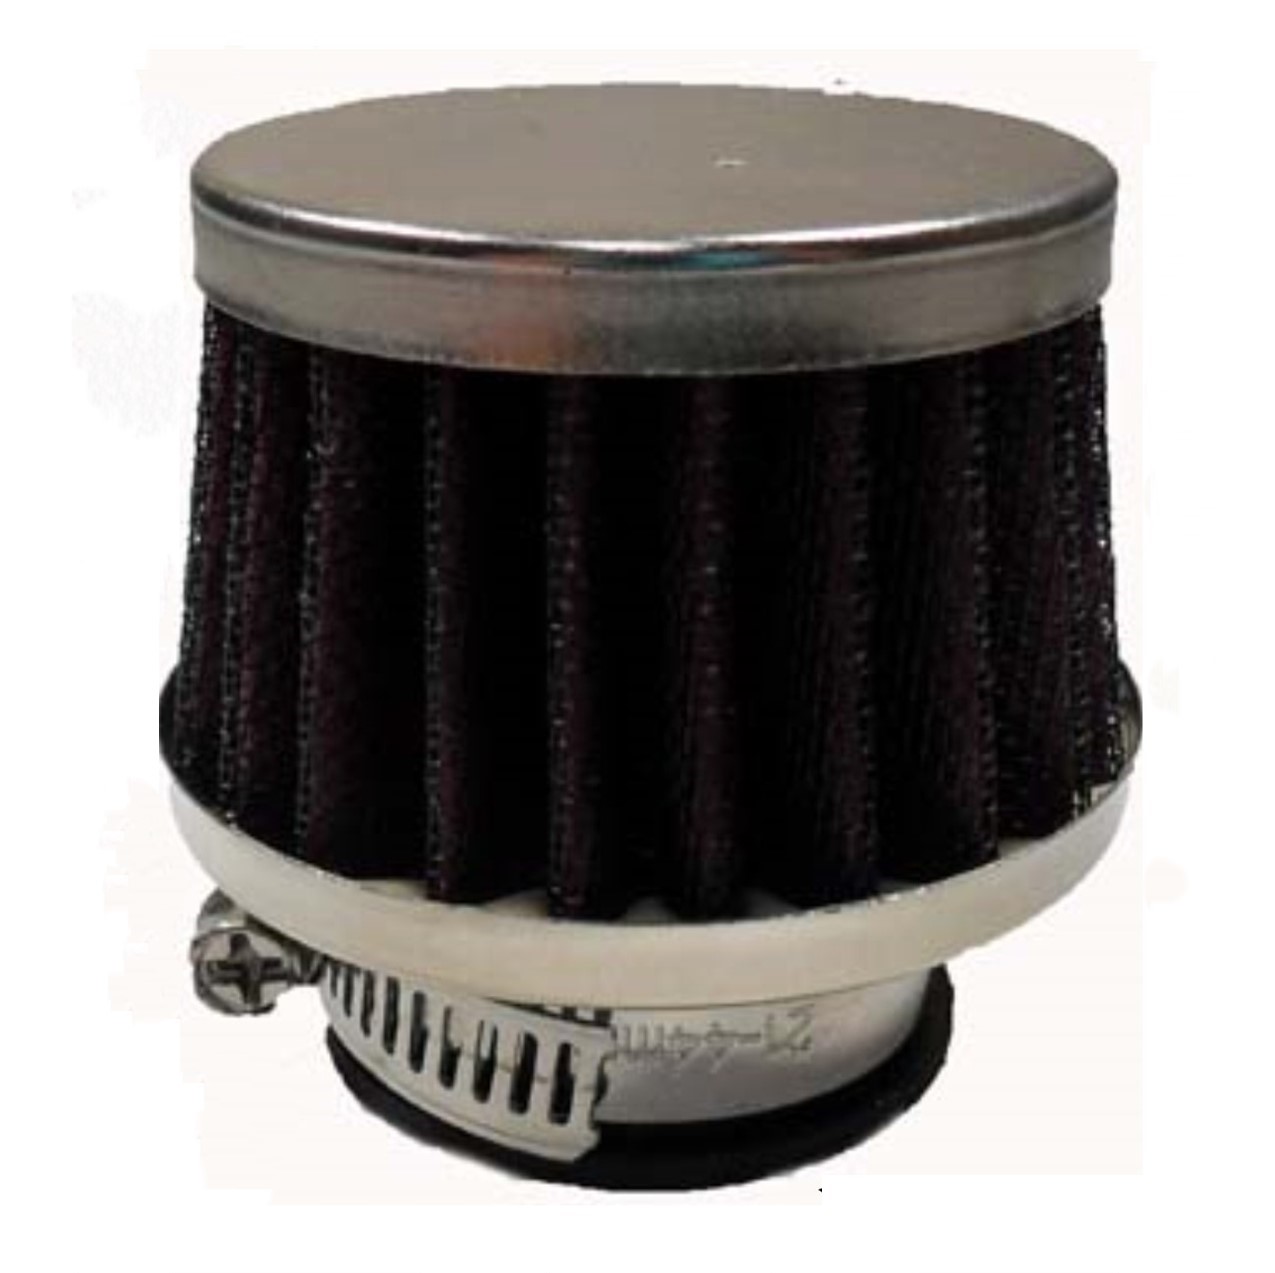 Air Filter ID=33mm, Total L=56mm Filter Color May Vary From Our Picture